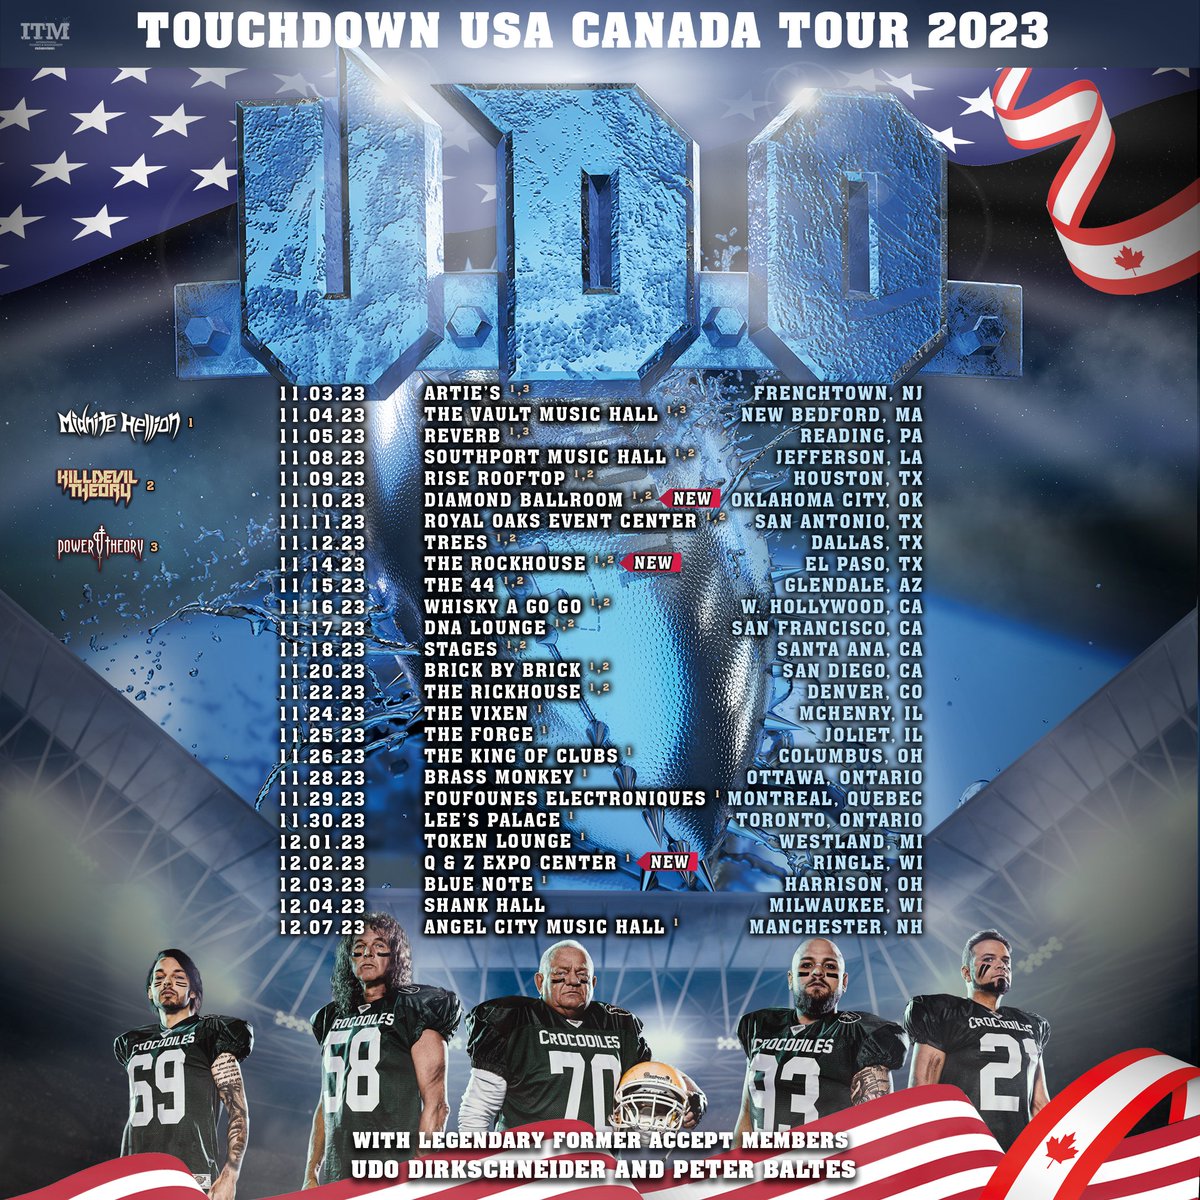 U.D.O. has scored a Touchdown with their latest release, and we are ready to hike the ball to them every night. Get ready for a massive Power Play heading across Canada and the USA! VIP Tickets for all shows are available here national-acts.com/UDO #midnitehellion #udo